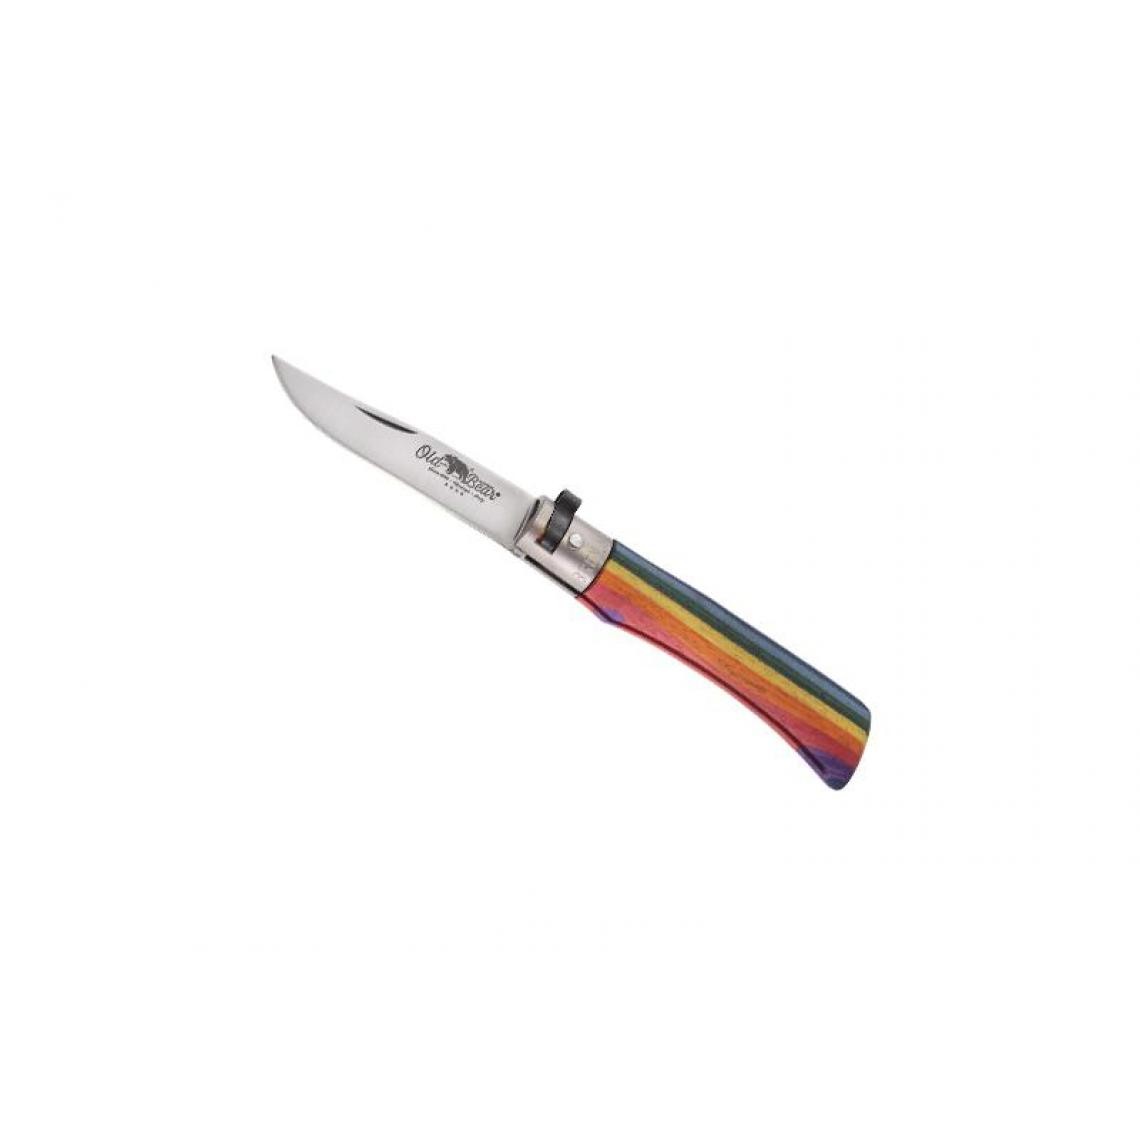 Divers Marques - OLD BEAR - 313.S - COUTEAU OLD BEAR RAINBOW TAILLE S - Outils de coupe